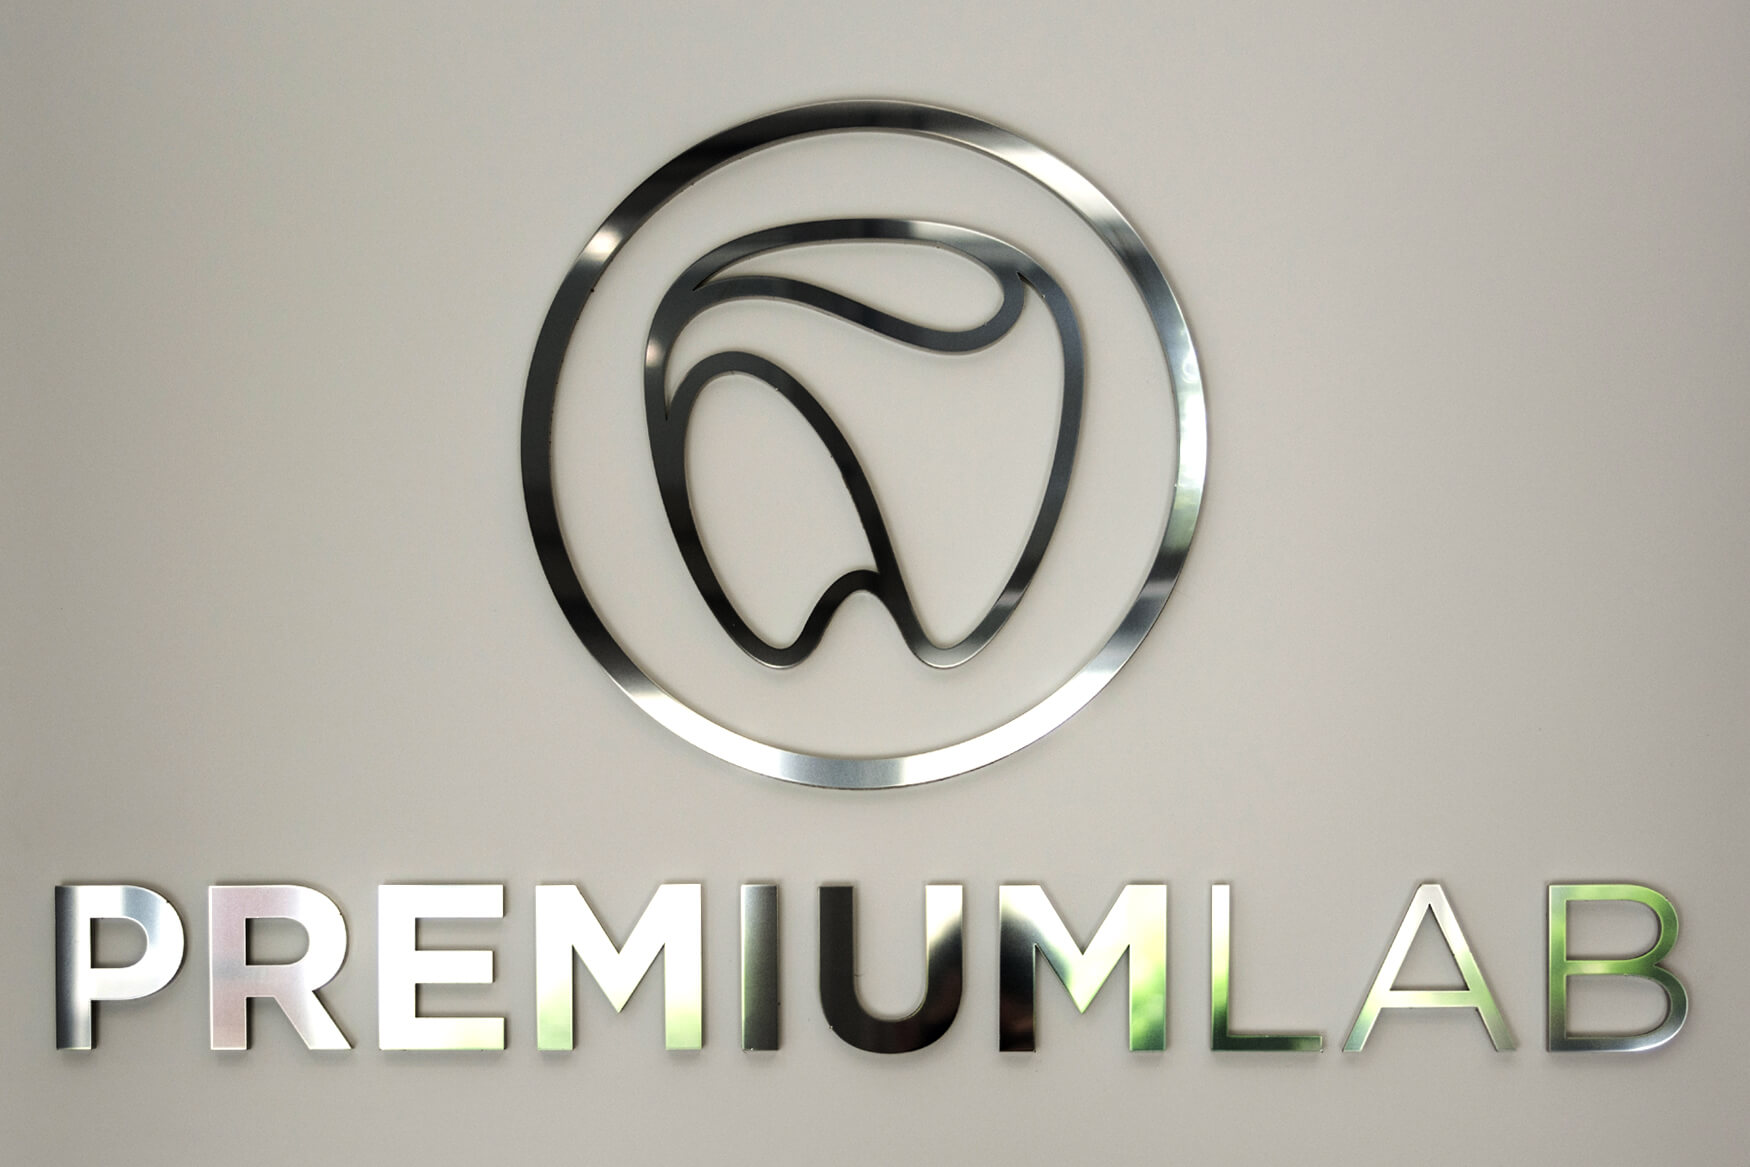 Premiumlab - Premiumlab - logo and 3D letters made of plexiglass and polished stainless steel placed in the lobby